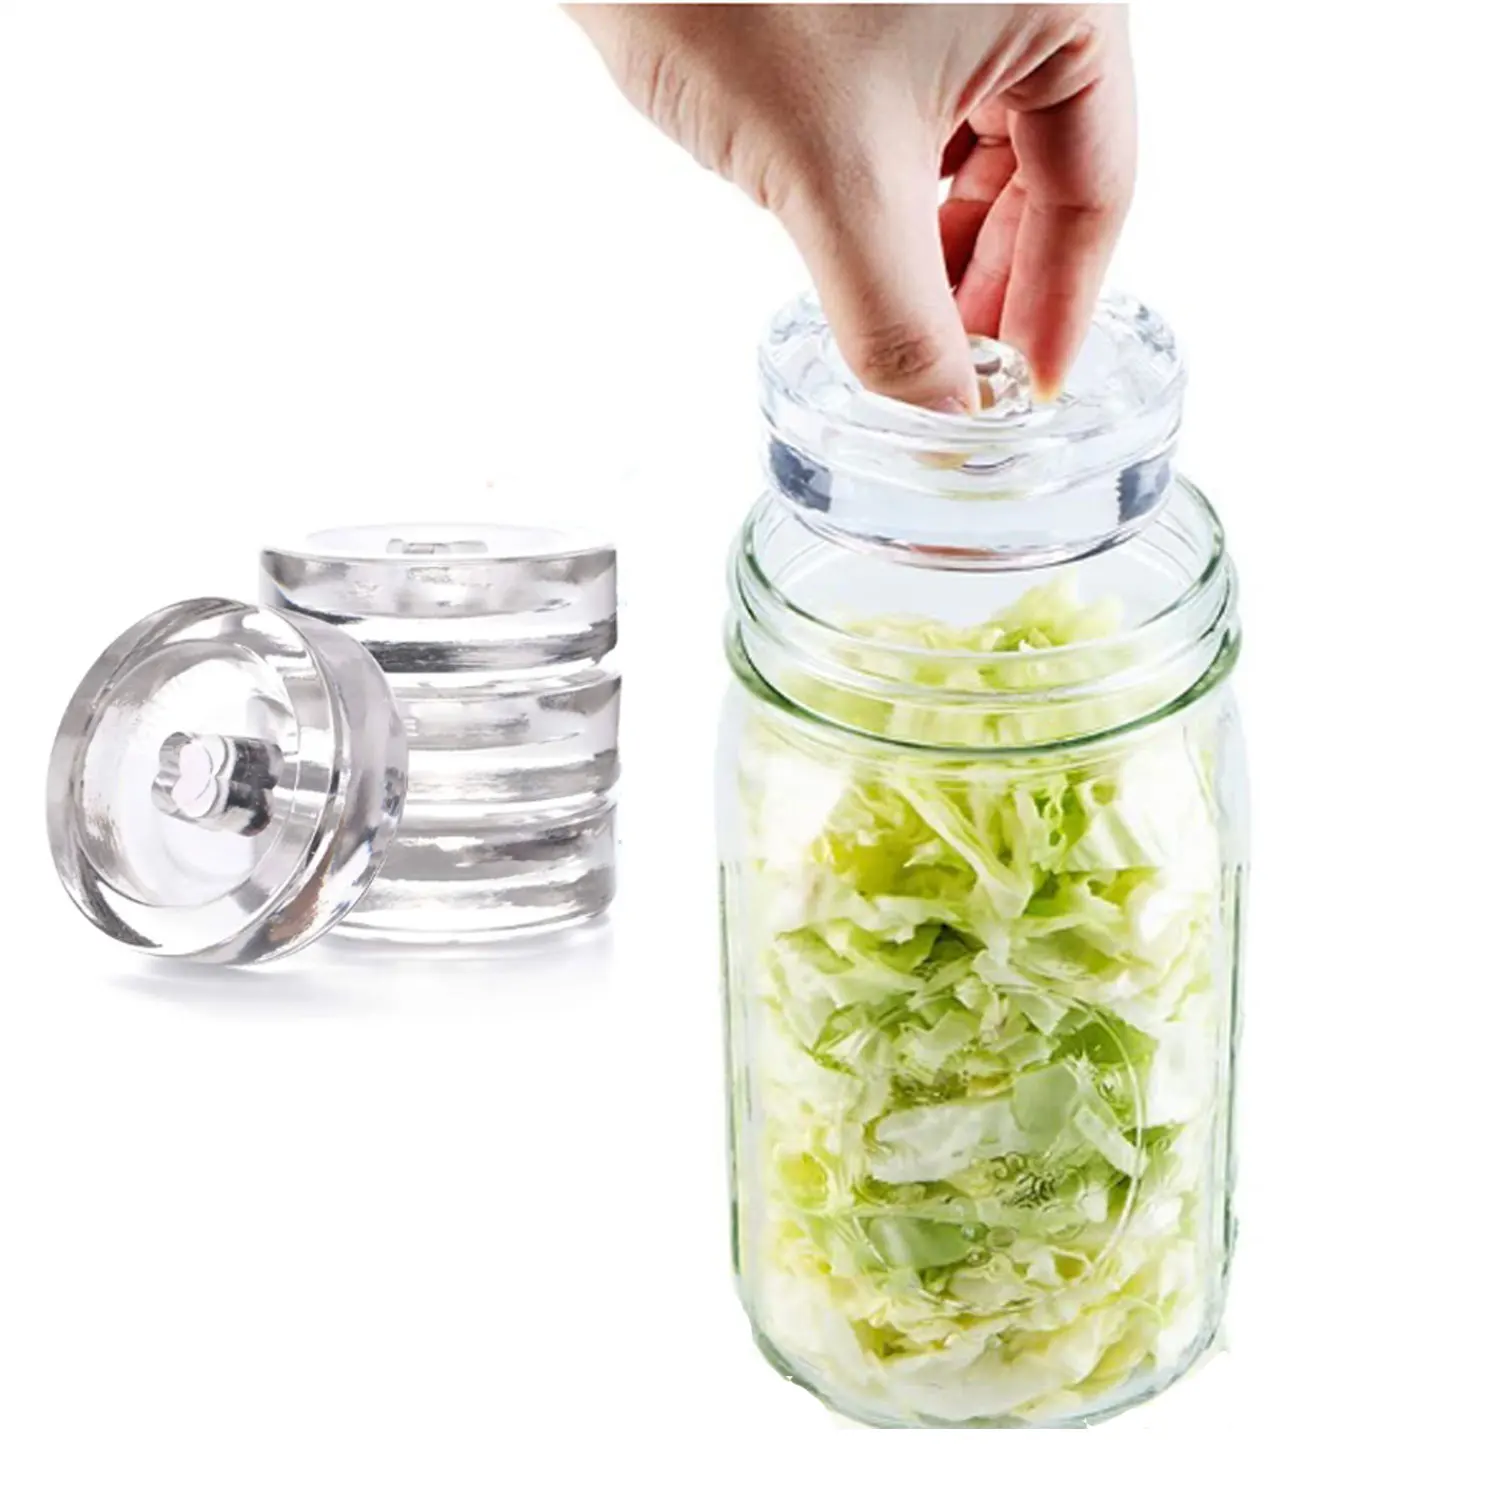 4Pcs Glass Weights with/without Easy Grip Fermentation Glass Weights for Wide Mouth Mason Jars Kimchi Sauerkraut Fermentation